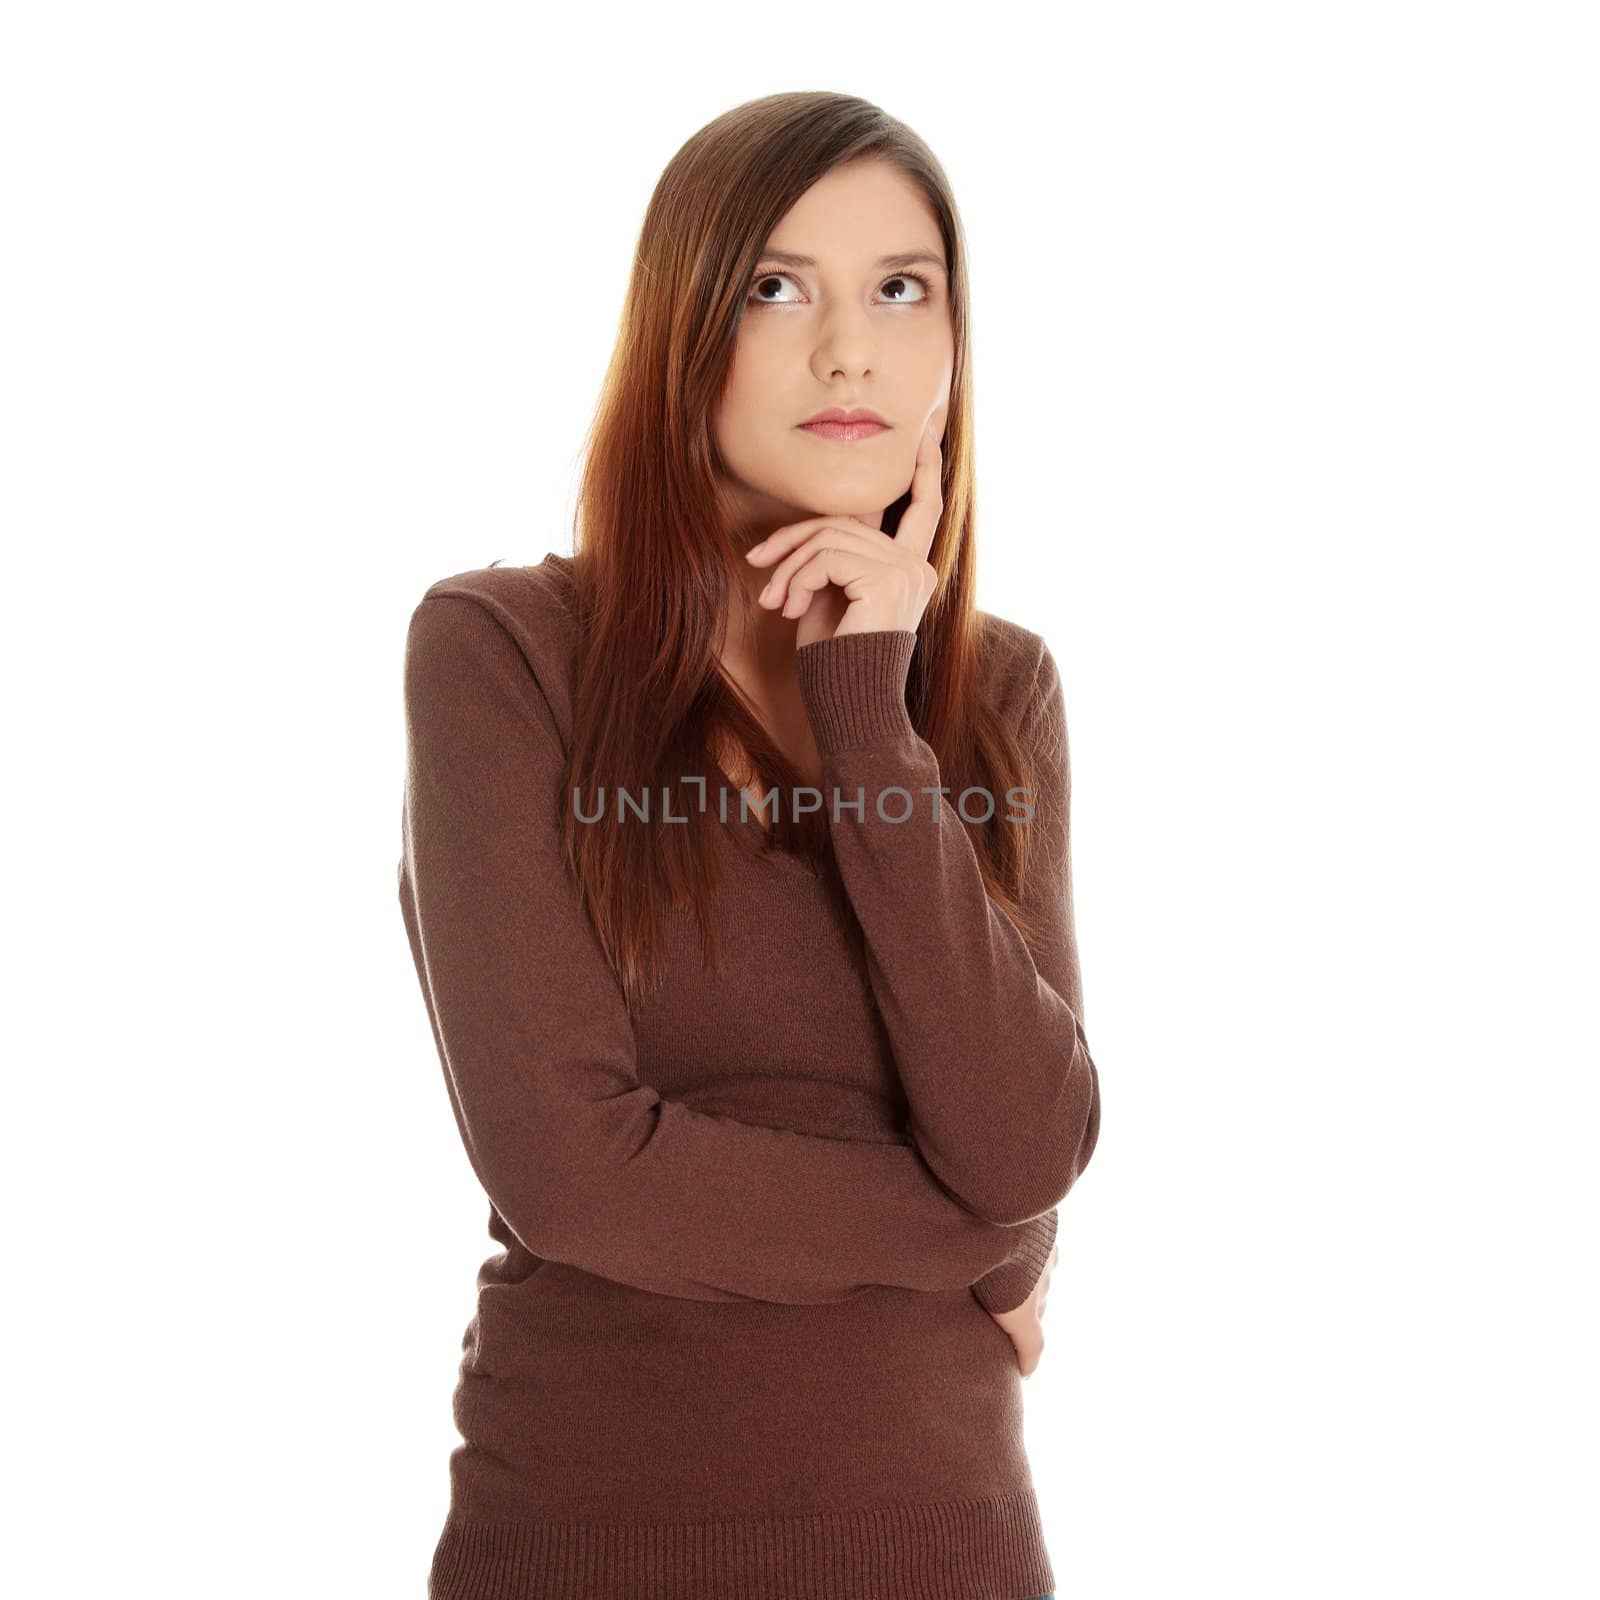 Thoughtful young woman, isolated over a white background